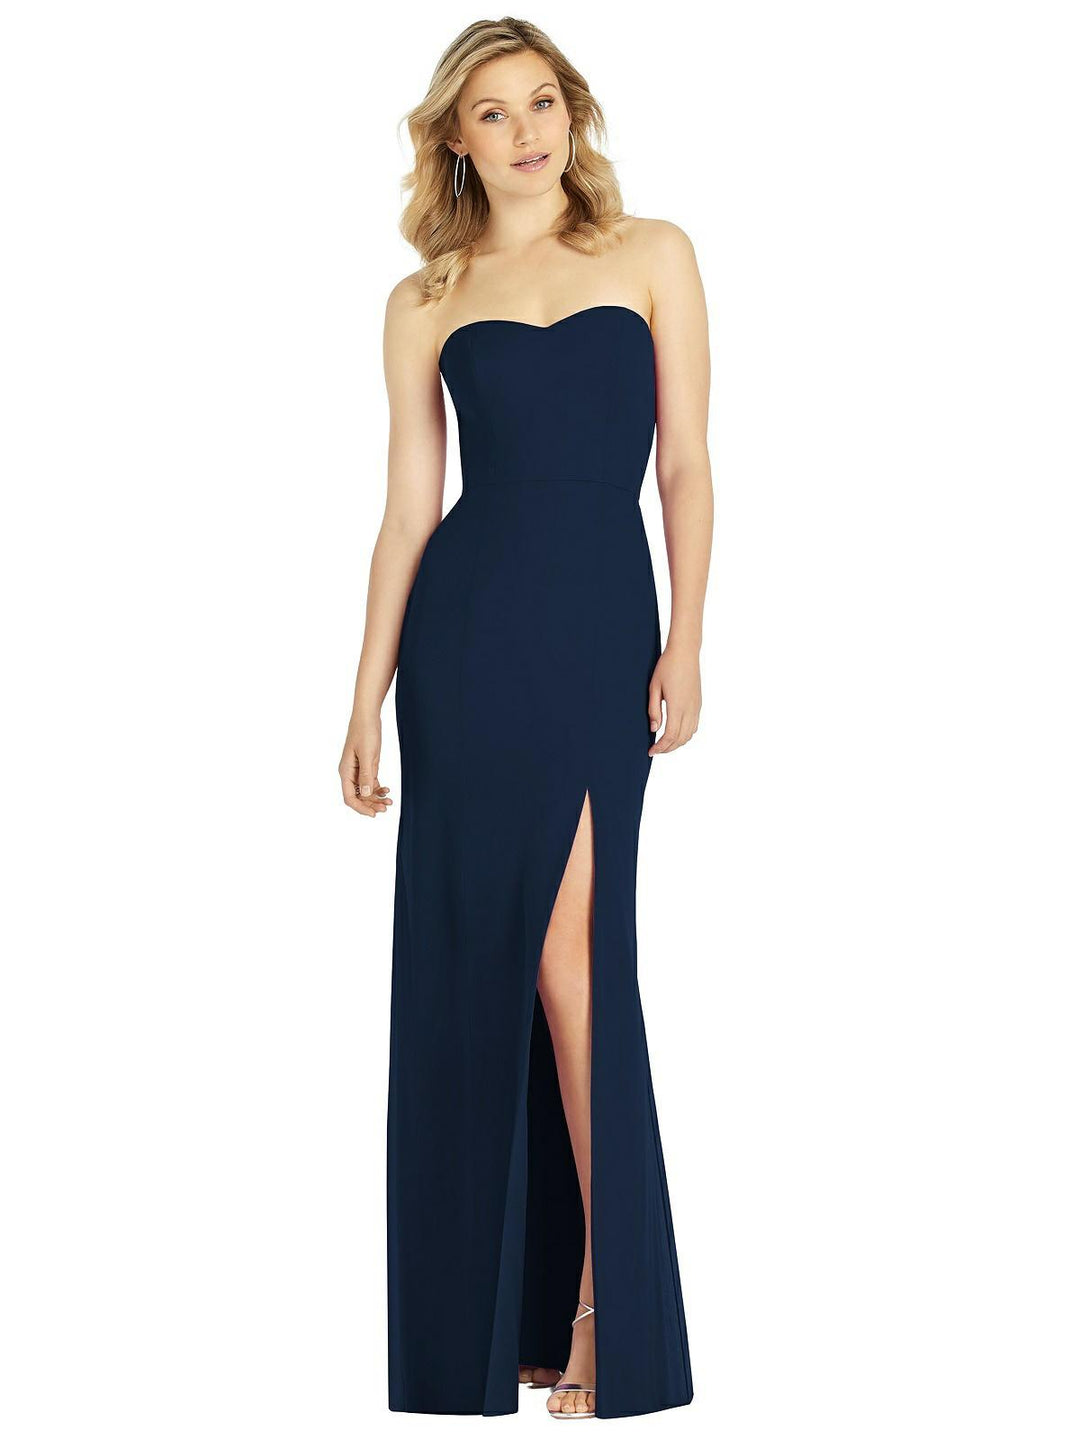 Strapless Chiffon Trumpet Gown with Front Slit by Dessy Style 6803 Size 8